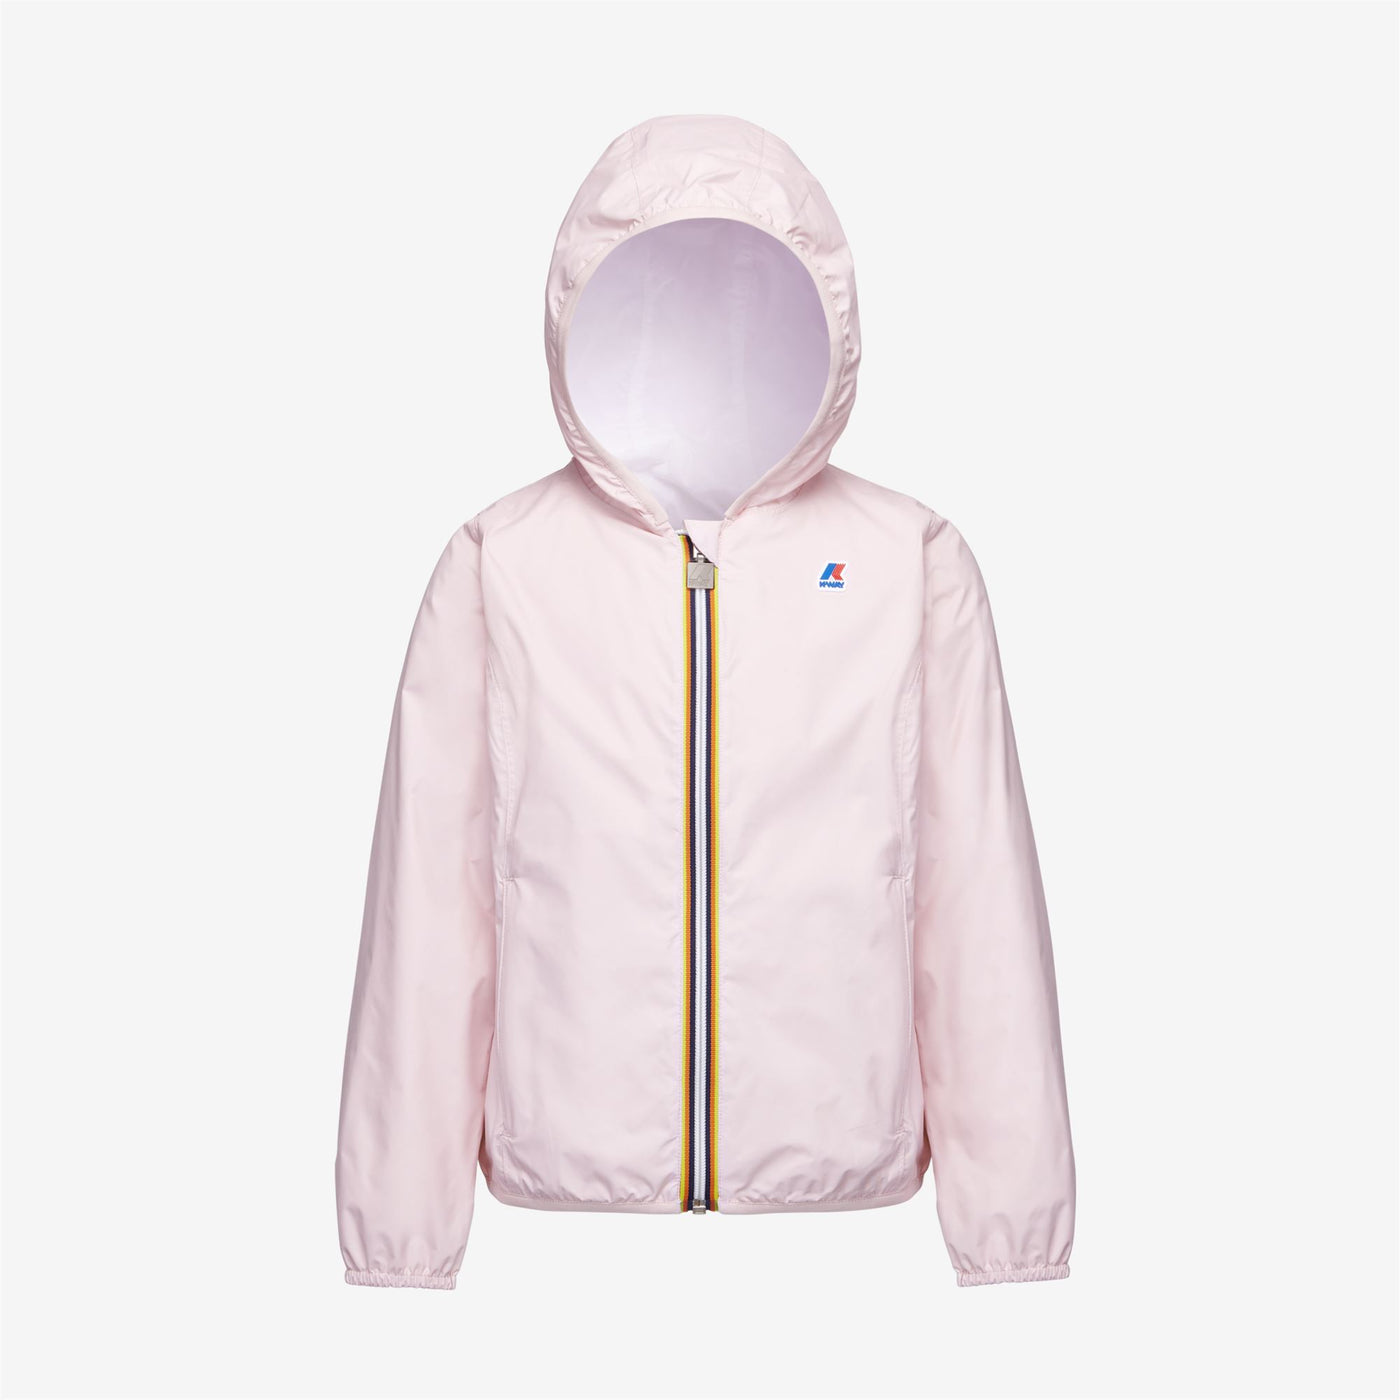 Jackets Girl P. LILY PLUS.2 DOUBLE Short PINK ROSE - WHITE Photo (jpg Rgb)			